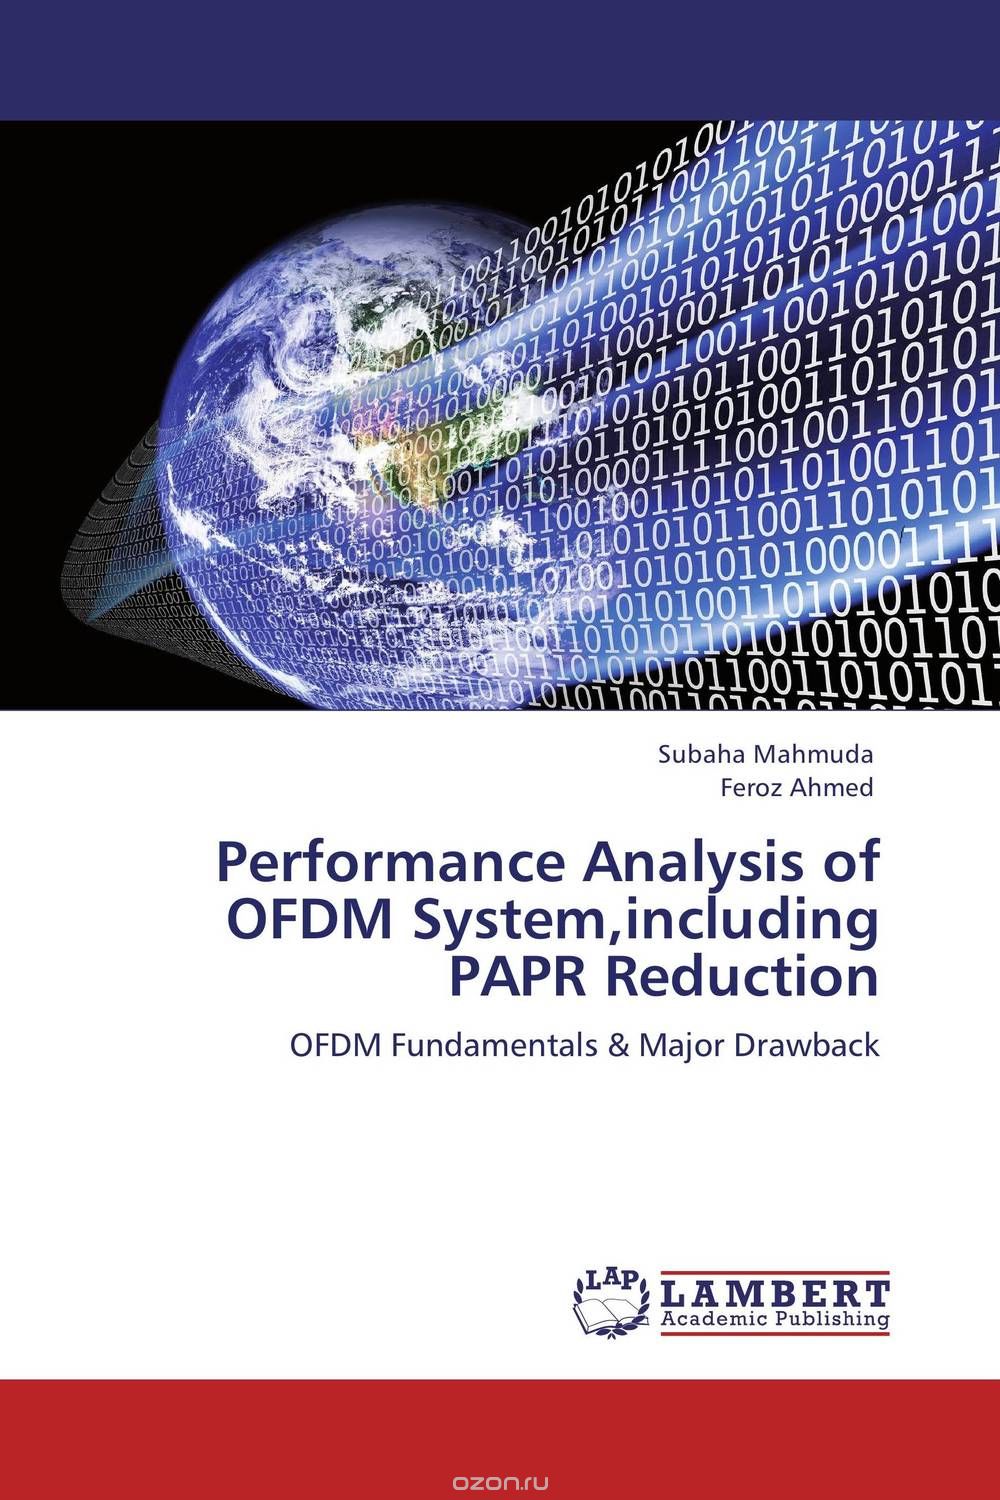 Performance Analysis of OFDM System,including PAPR Reduction